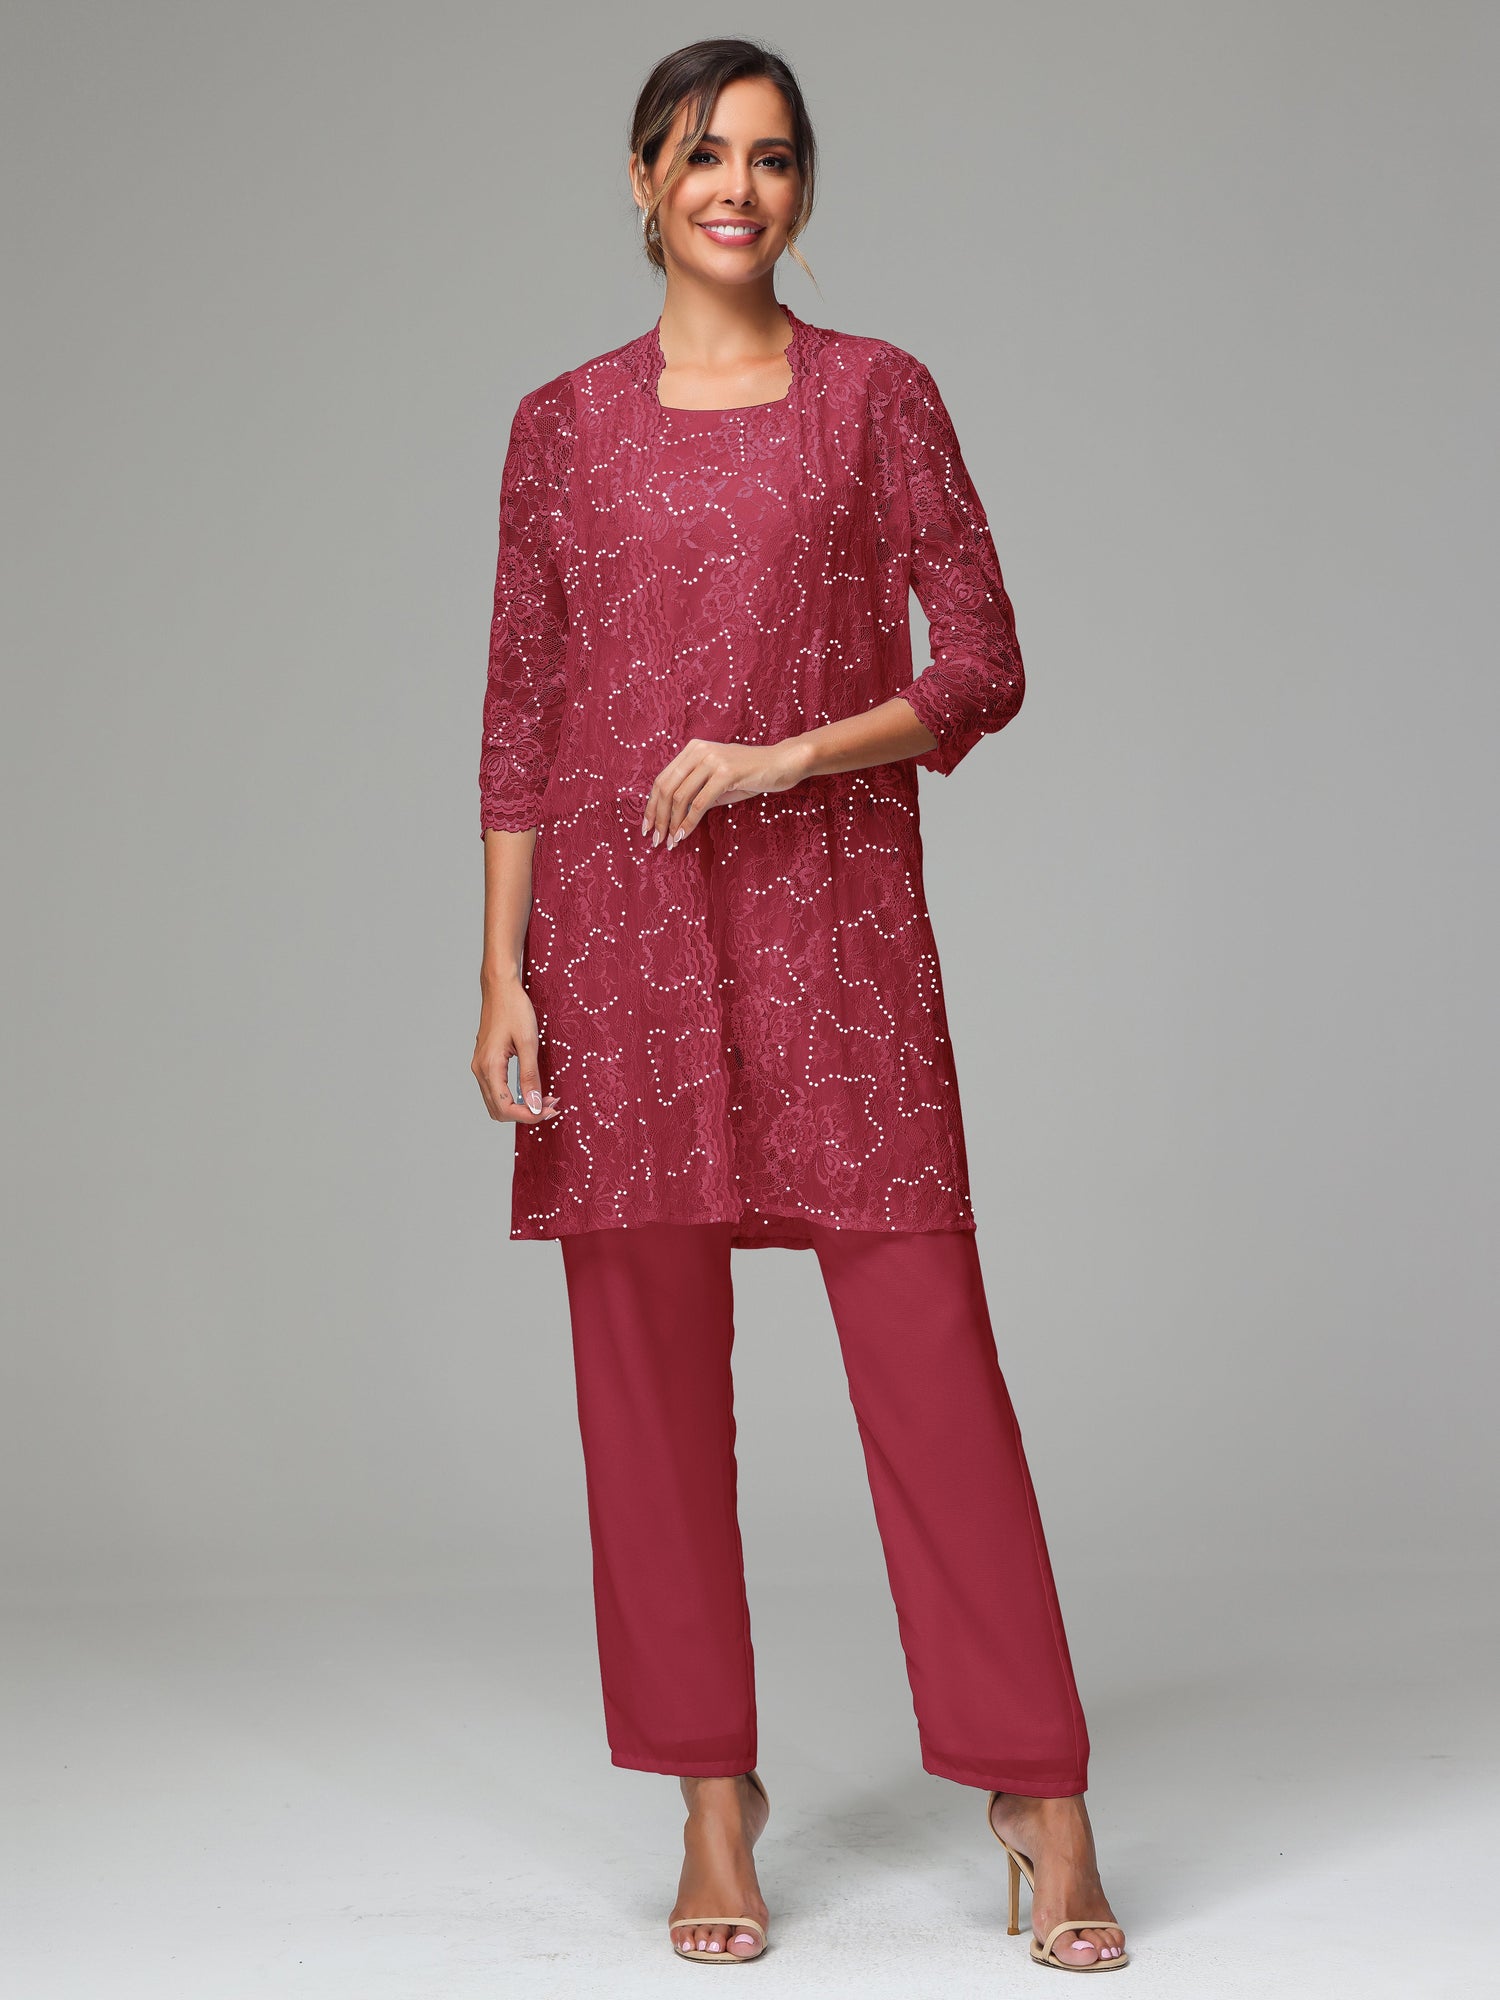 Chic Chiffon Lace 3 Pieces Long Sleeves Mother Of The Bride Dress Pant